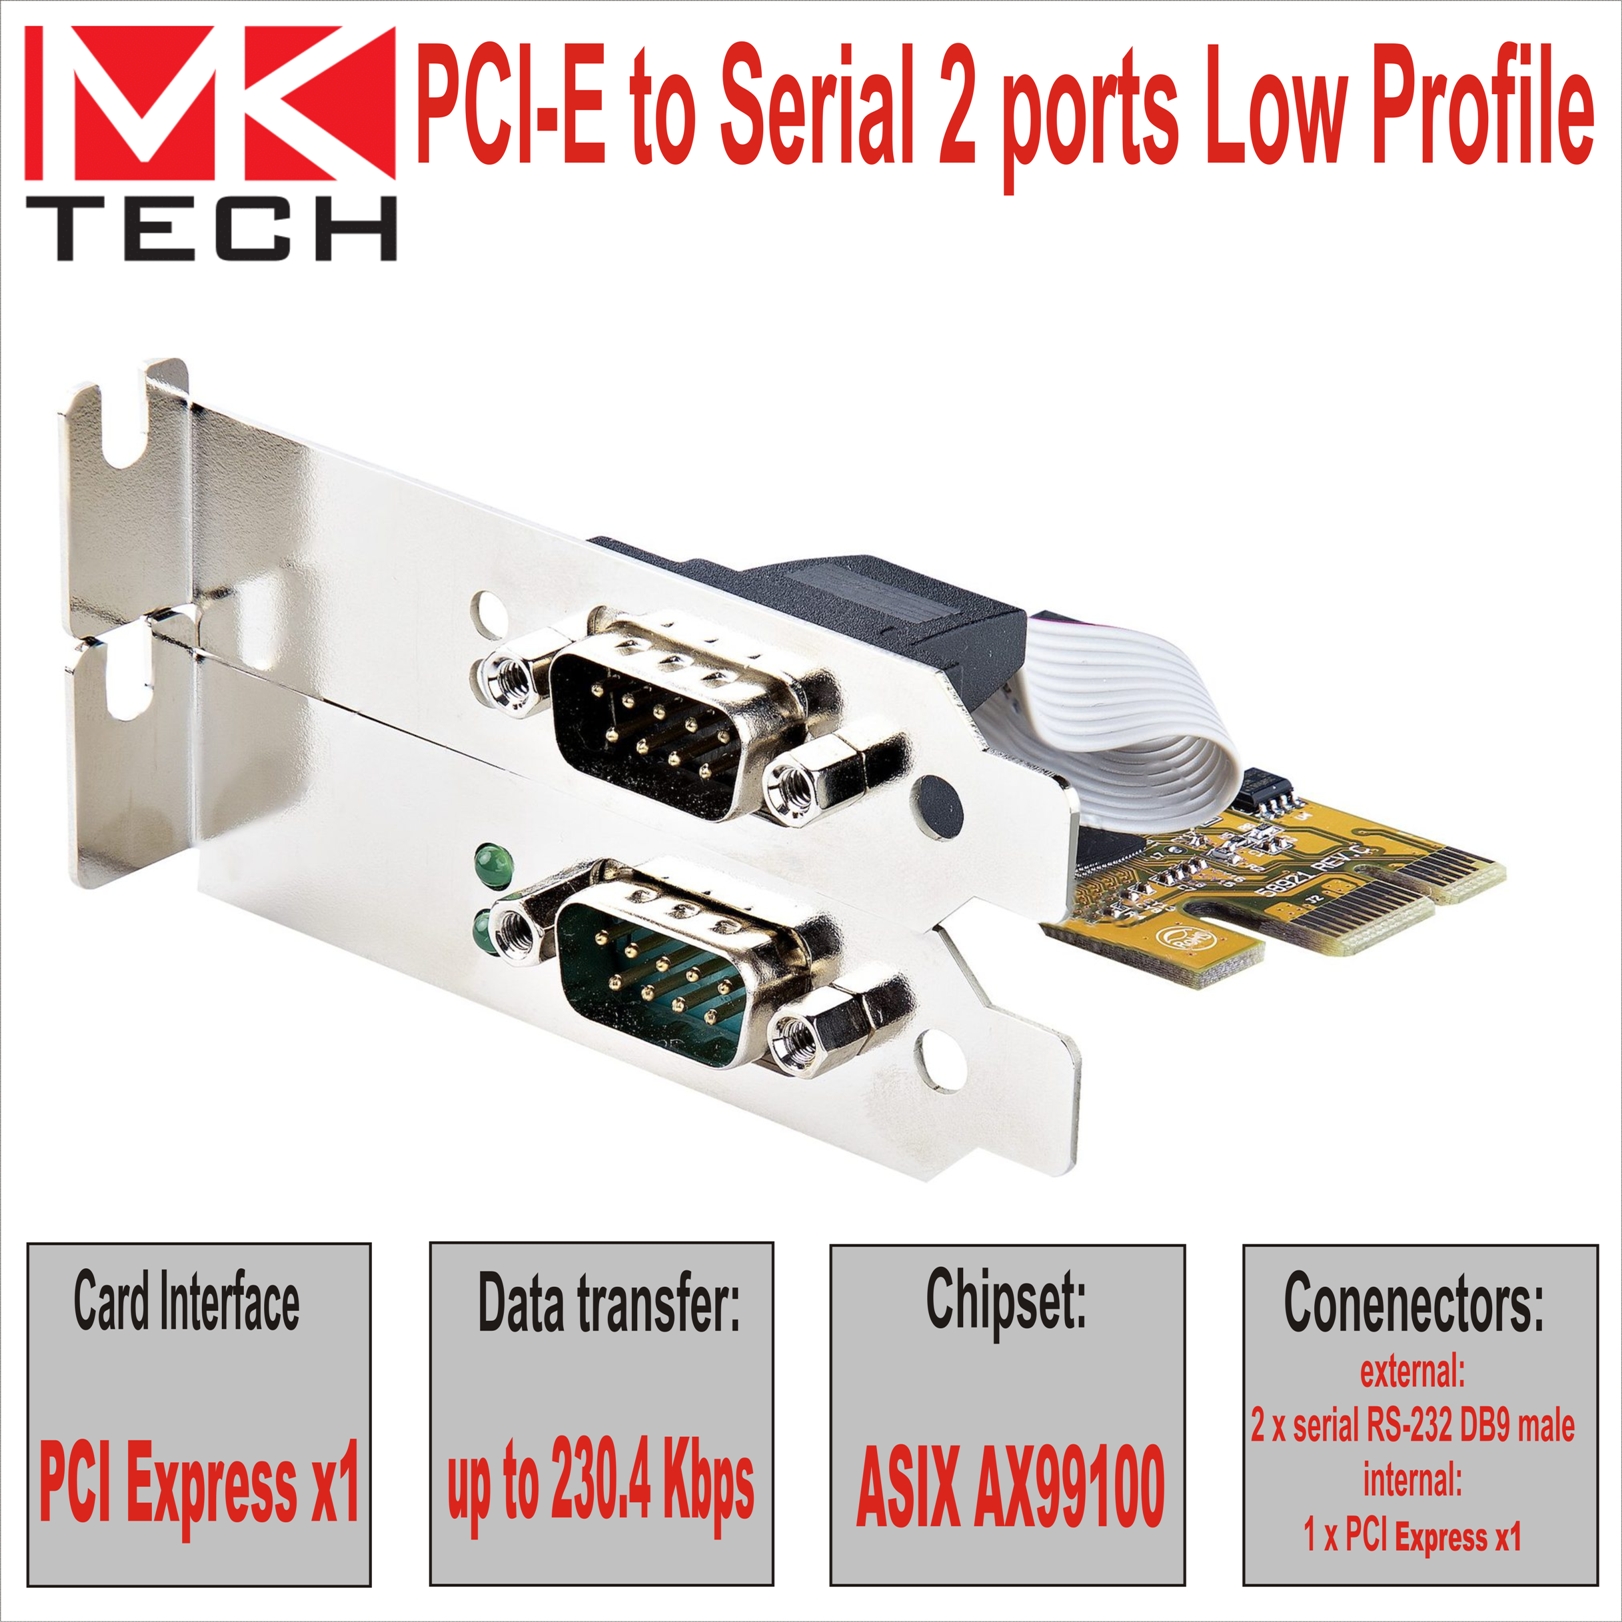 PCI-E to Serial 2 ports Low Profile MKTECH